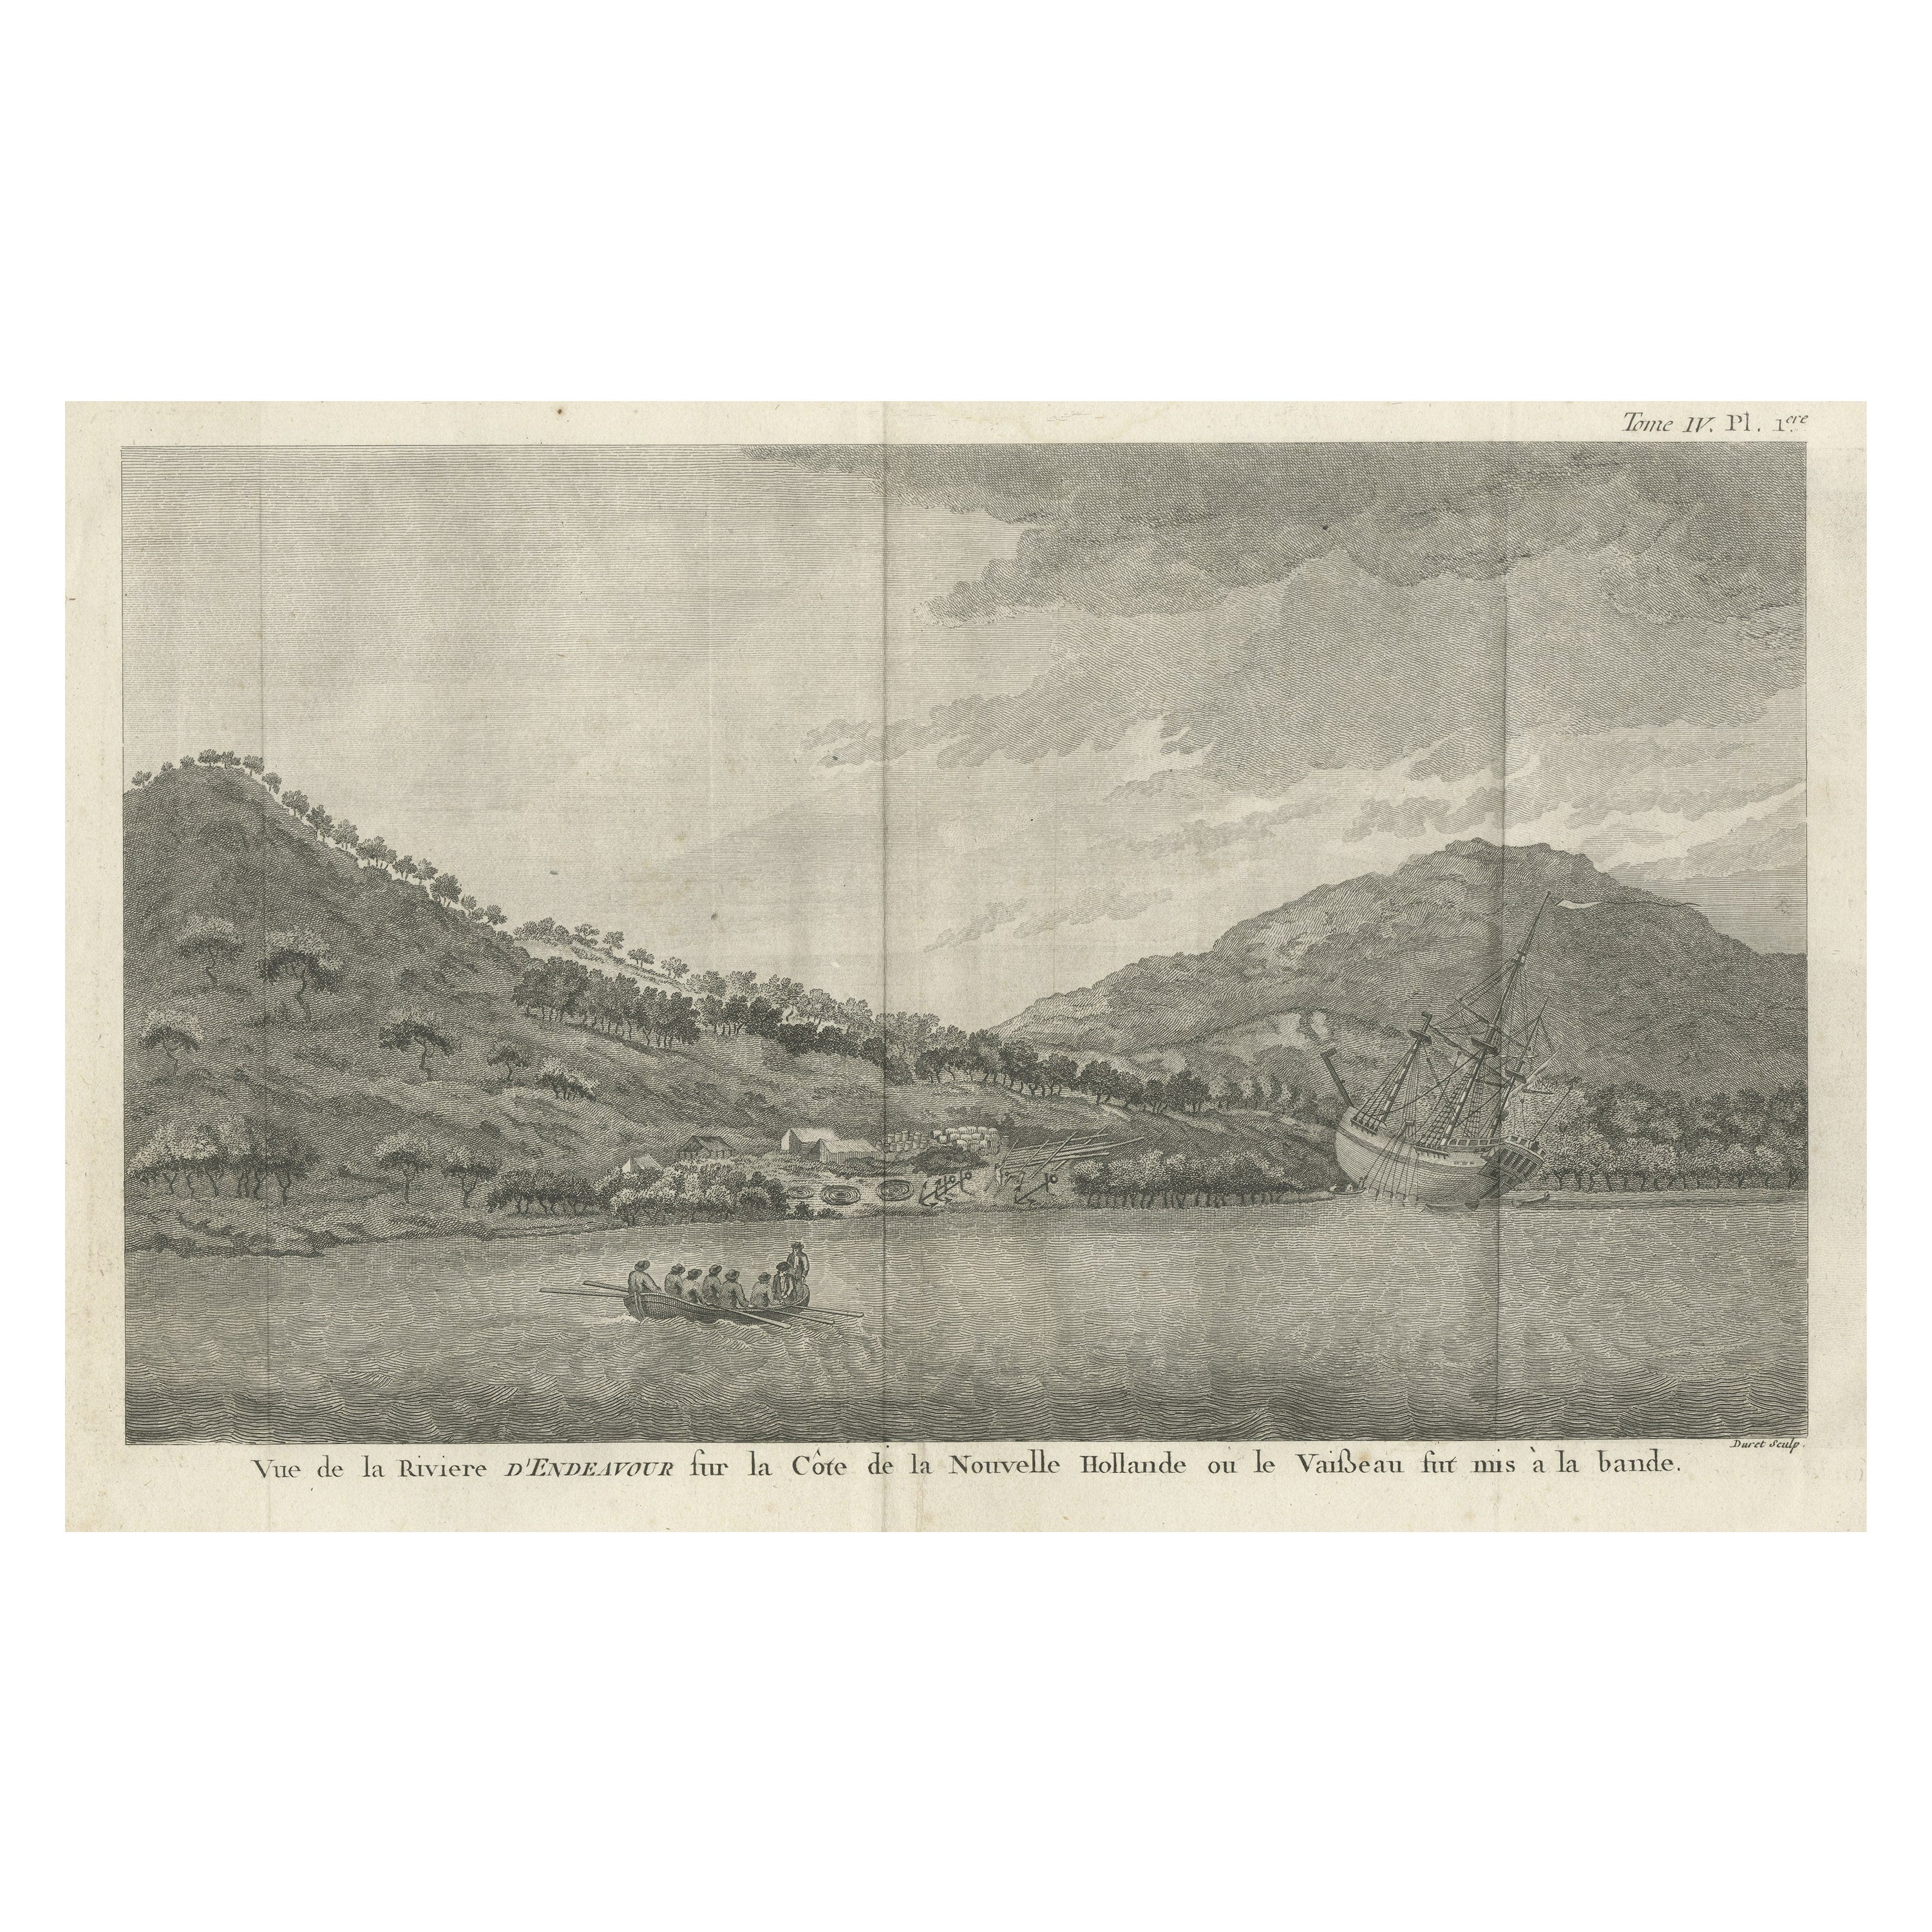 A Historic View of Australia: Endeavour River, New Holland, 1773 For Sale